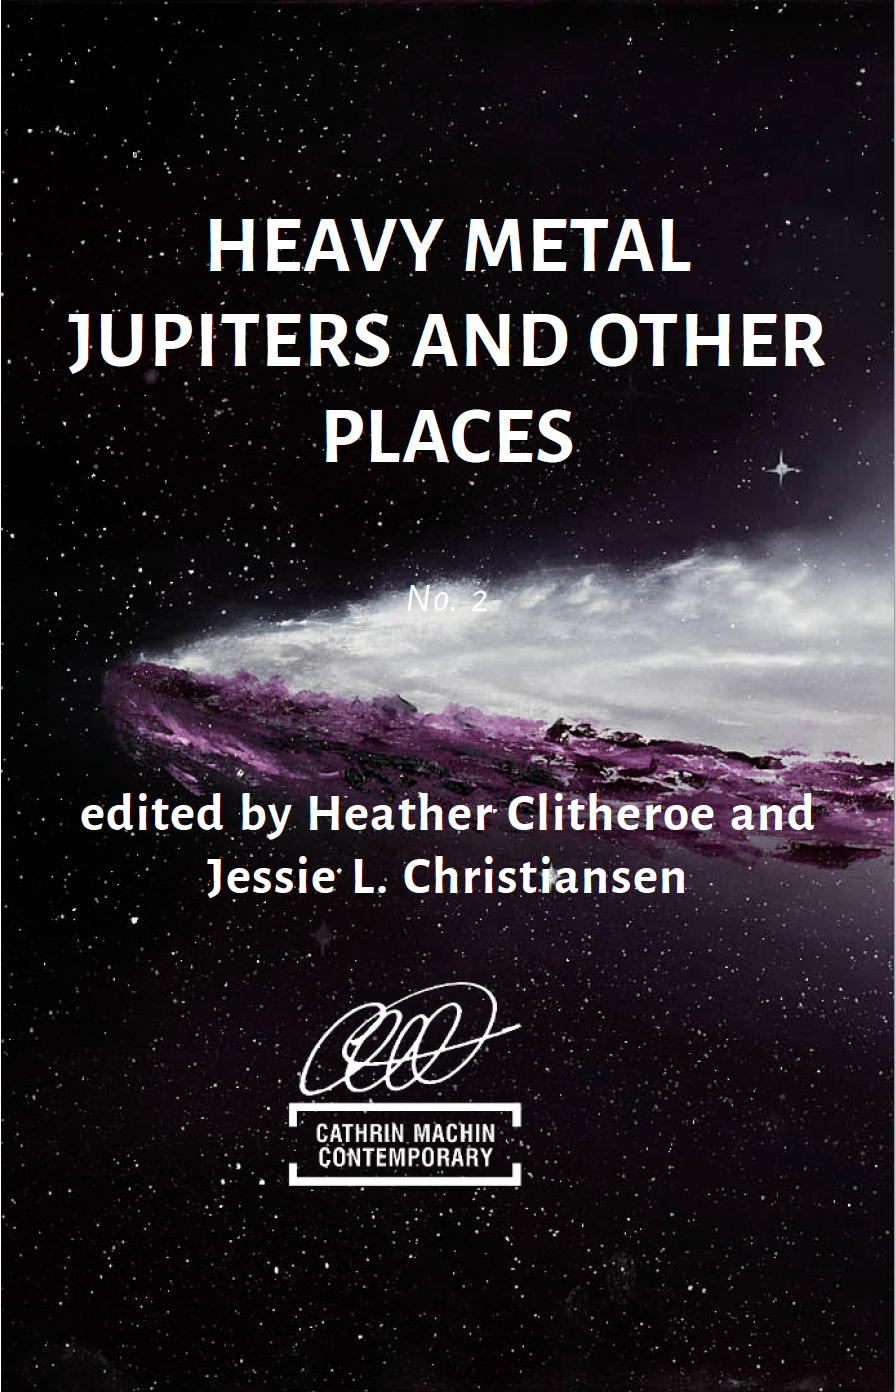 Heavy Metal Jupiters and Other Places - Tuesday